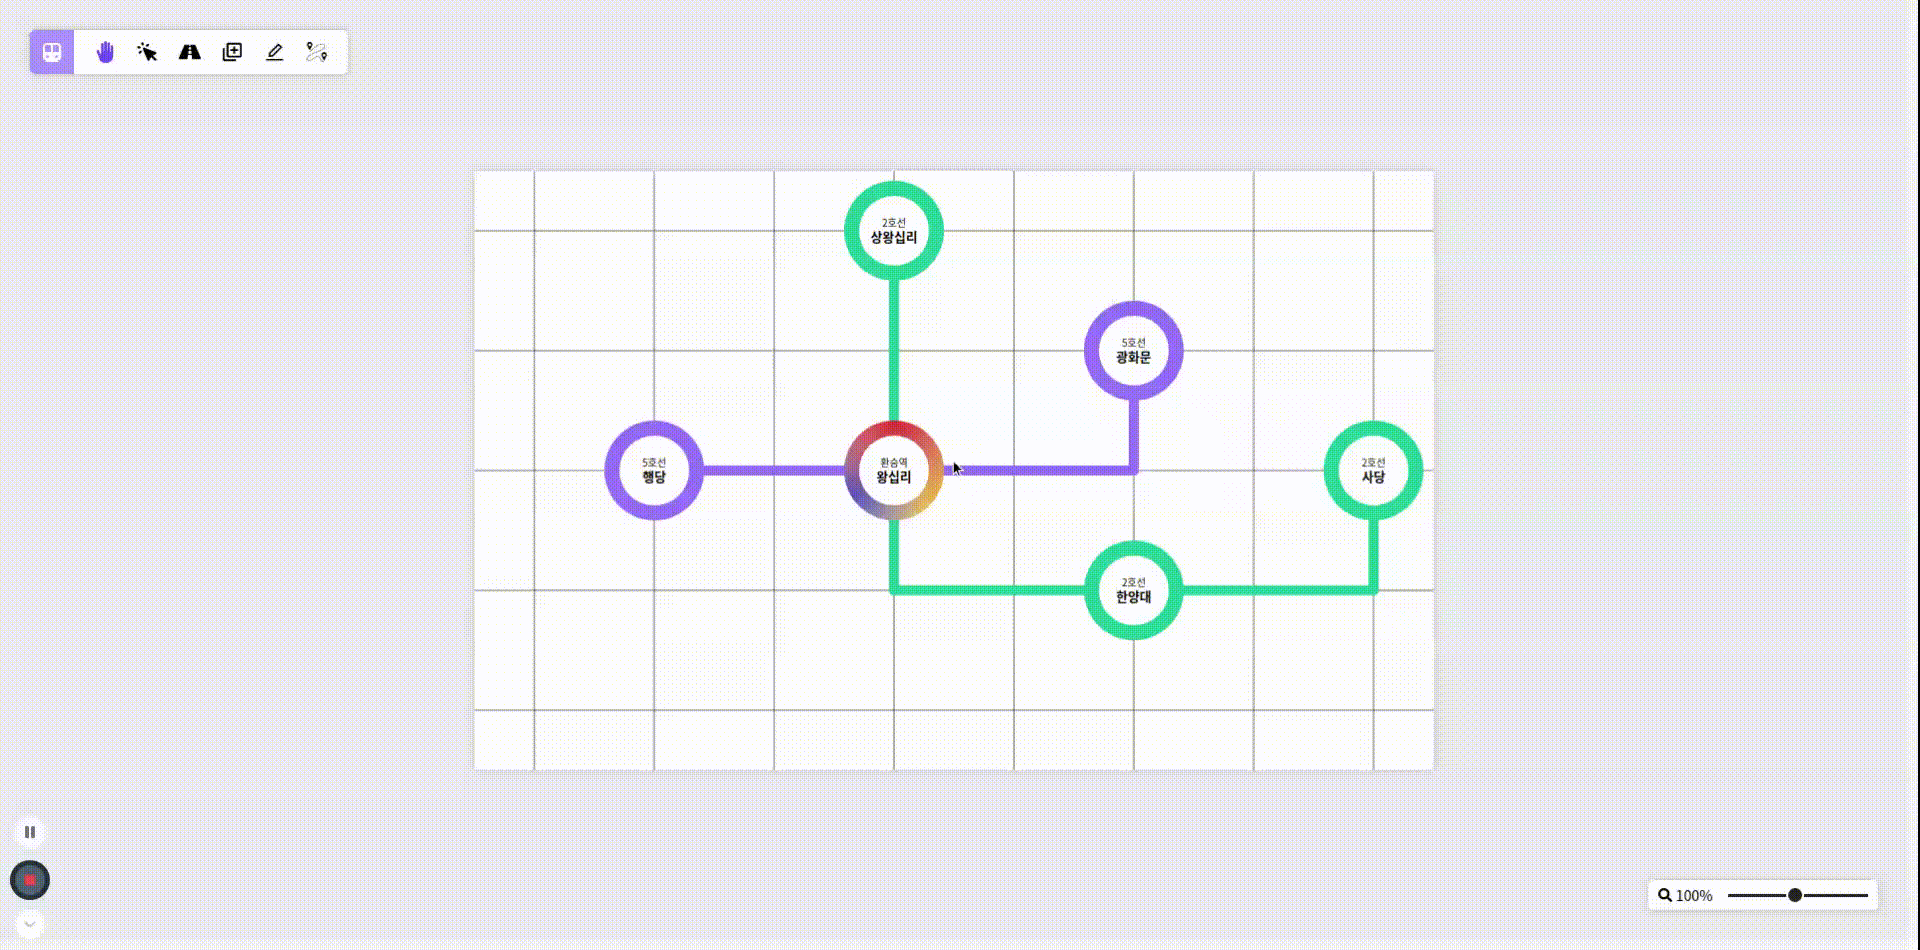 train-map-visualizer-closing-review-6.gif